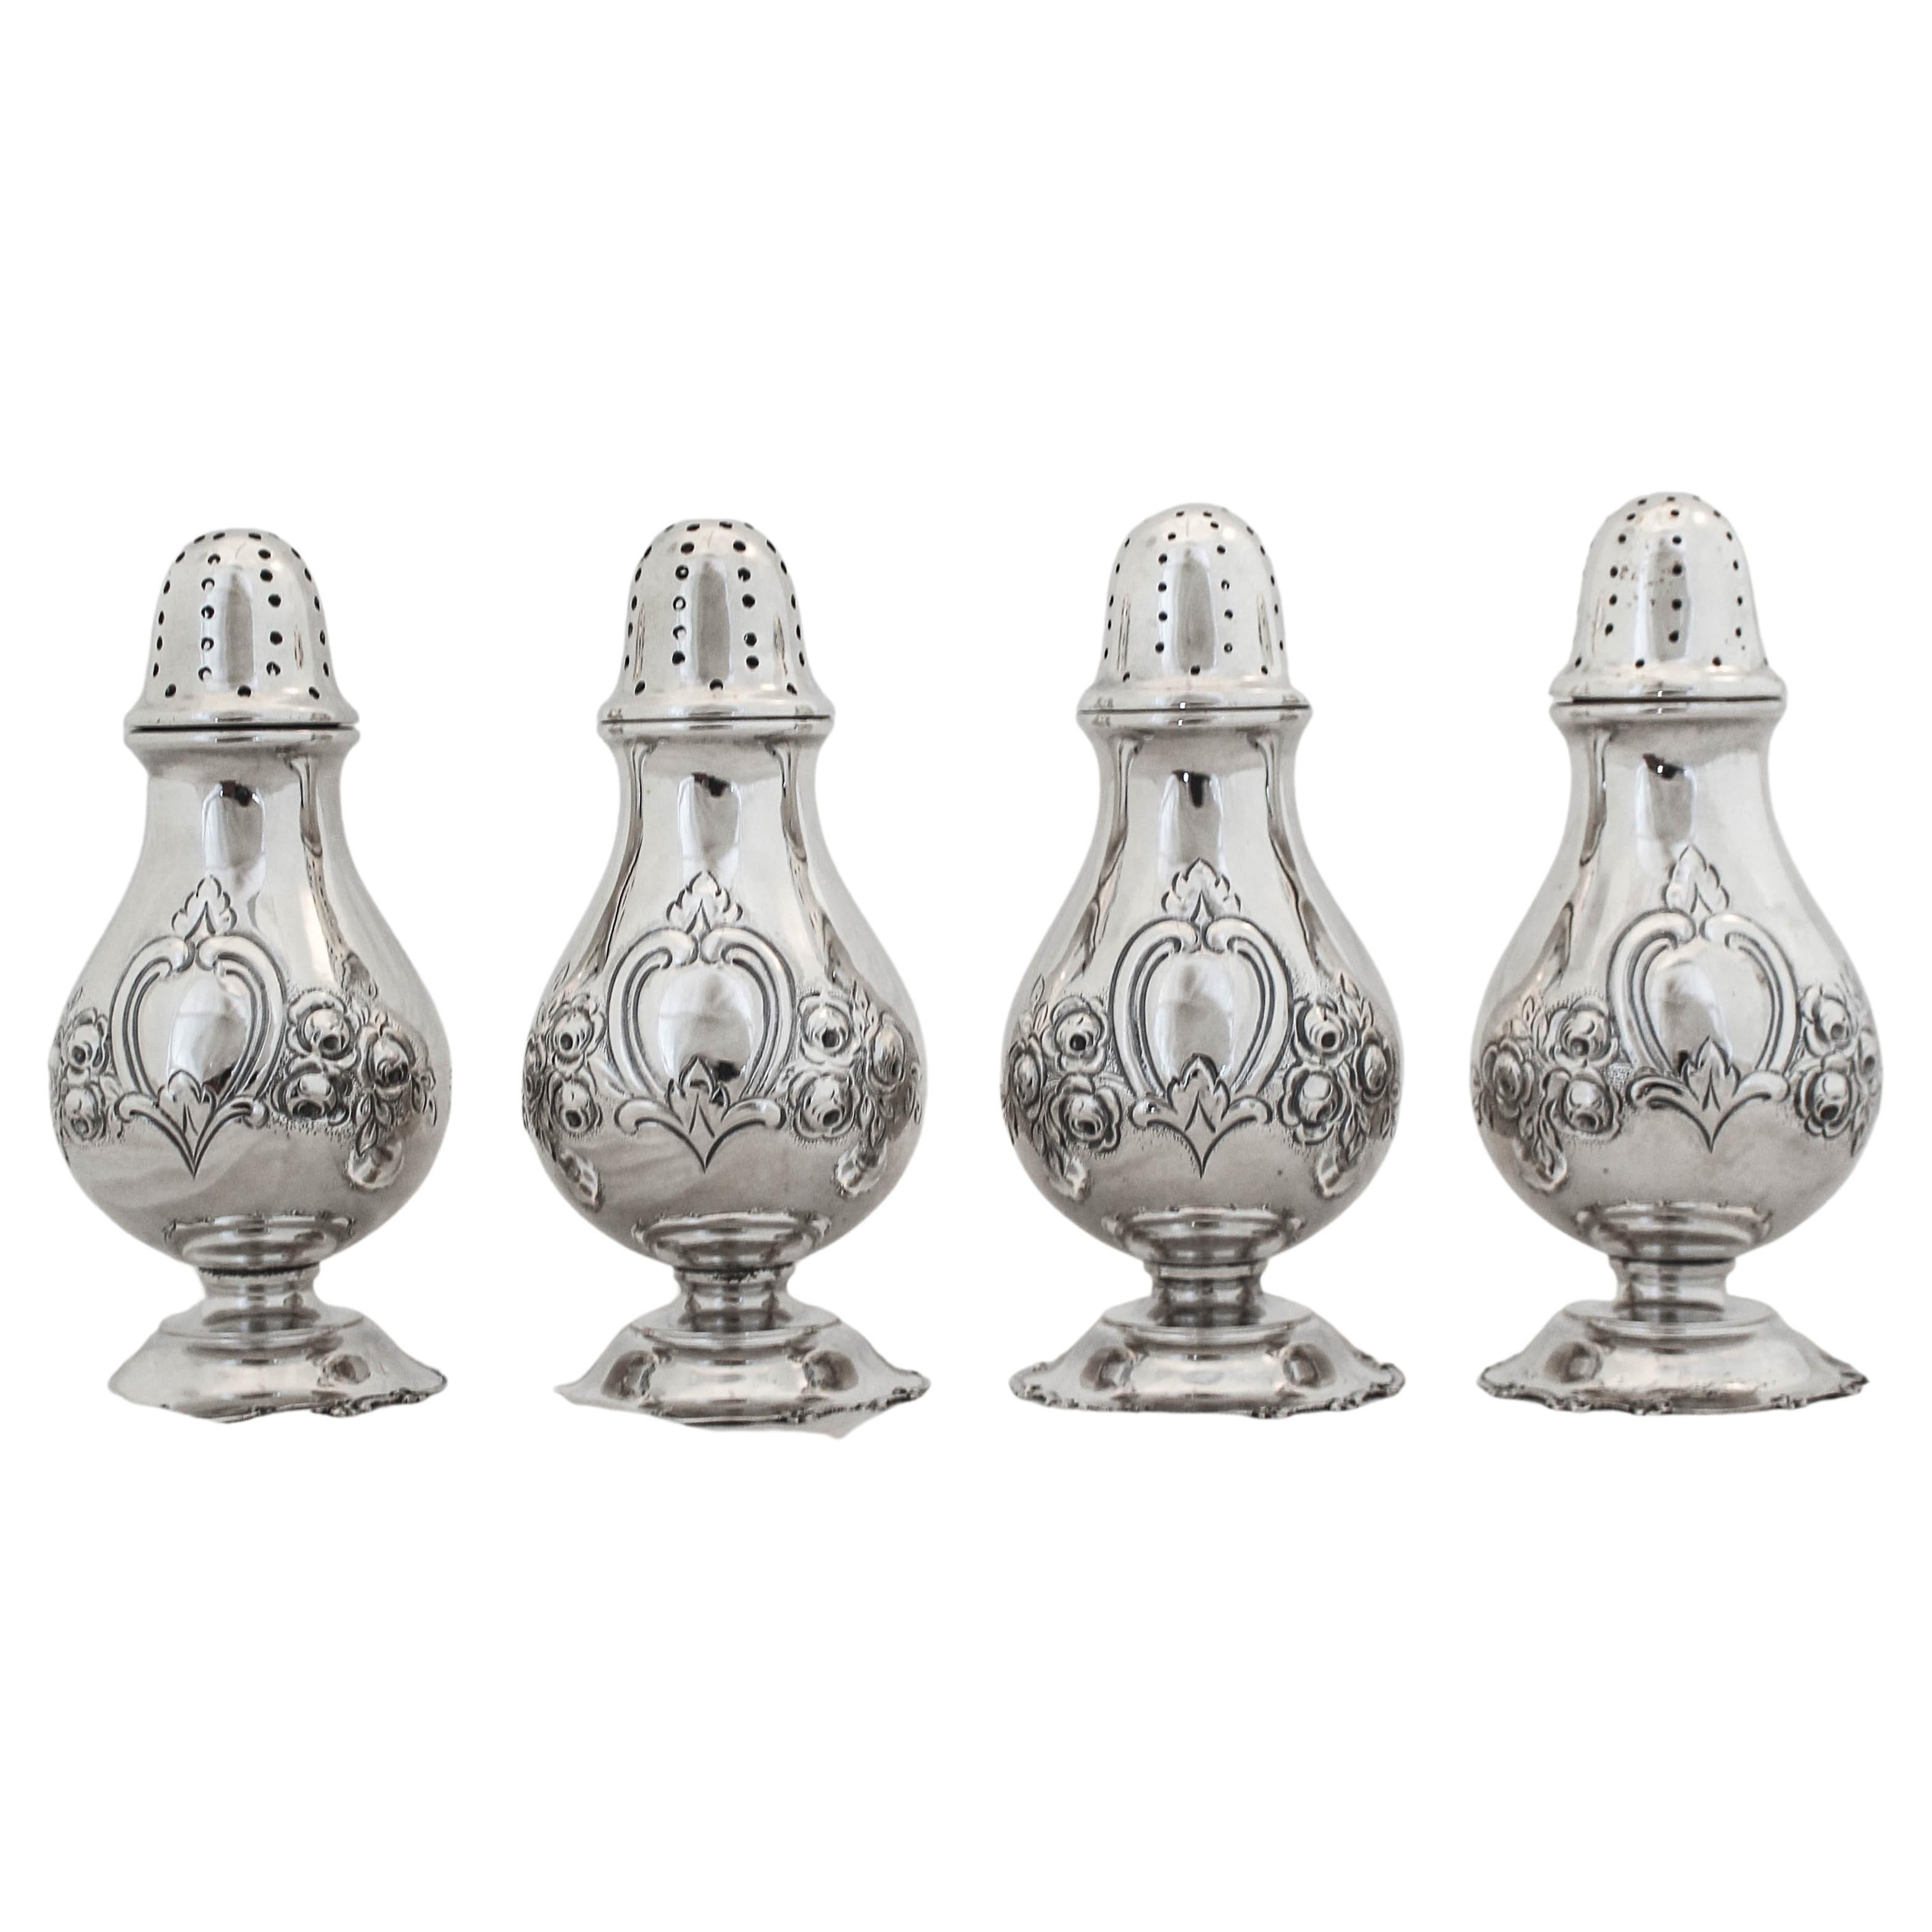 Set of a Four Sterling Salt Shakers